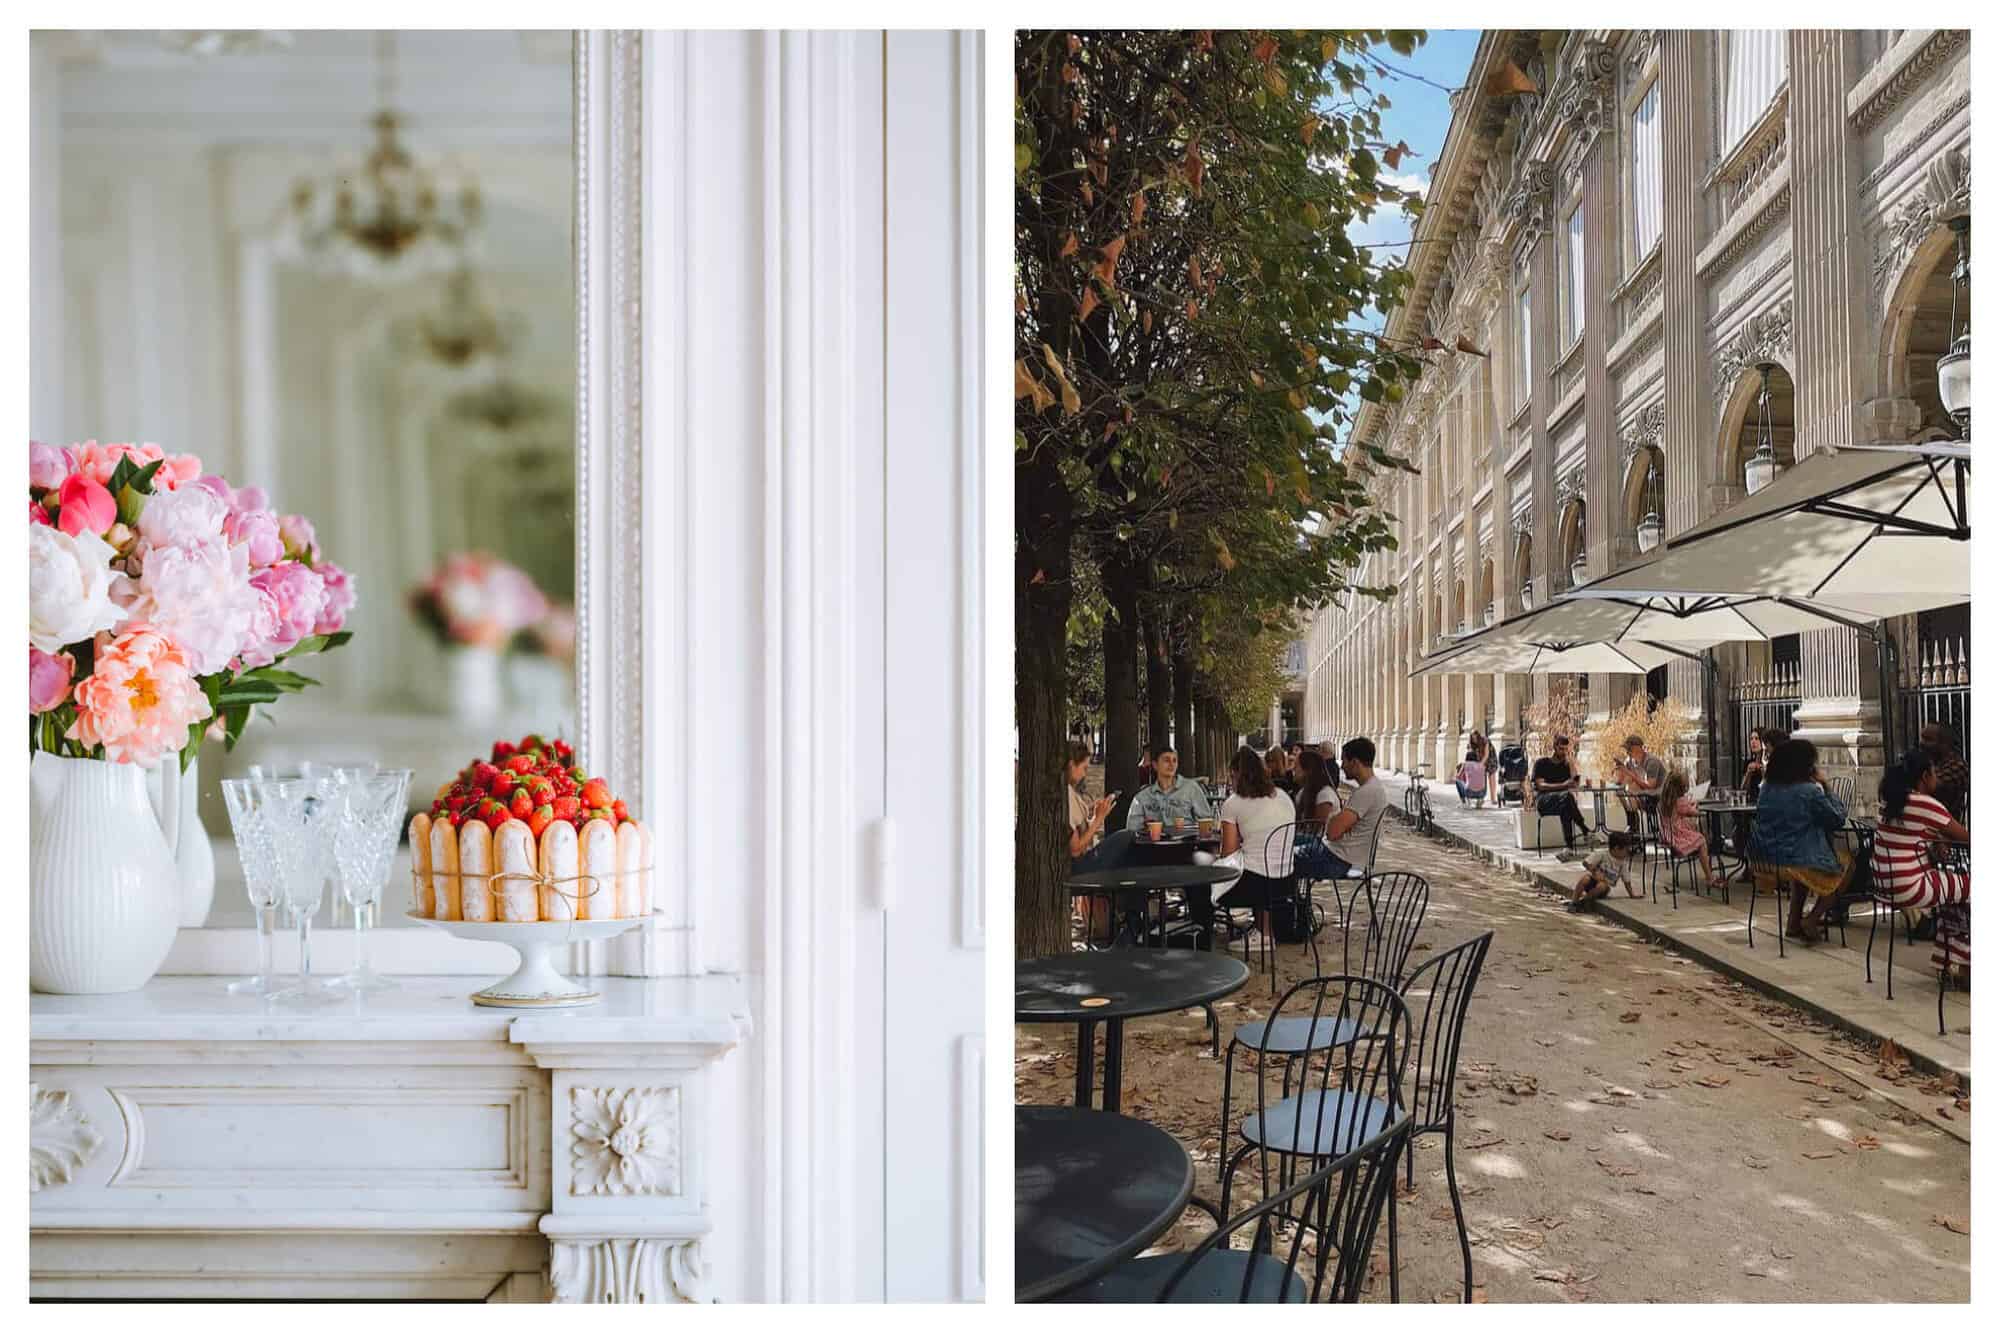 Left: A cake is shown on a mantle with champagne flutes and flowers. Right: People enjoy dining outside a Parisian cafe. 